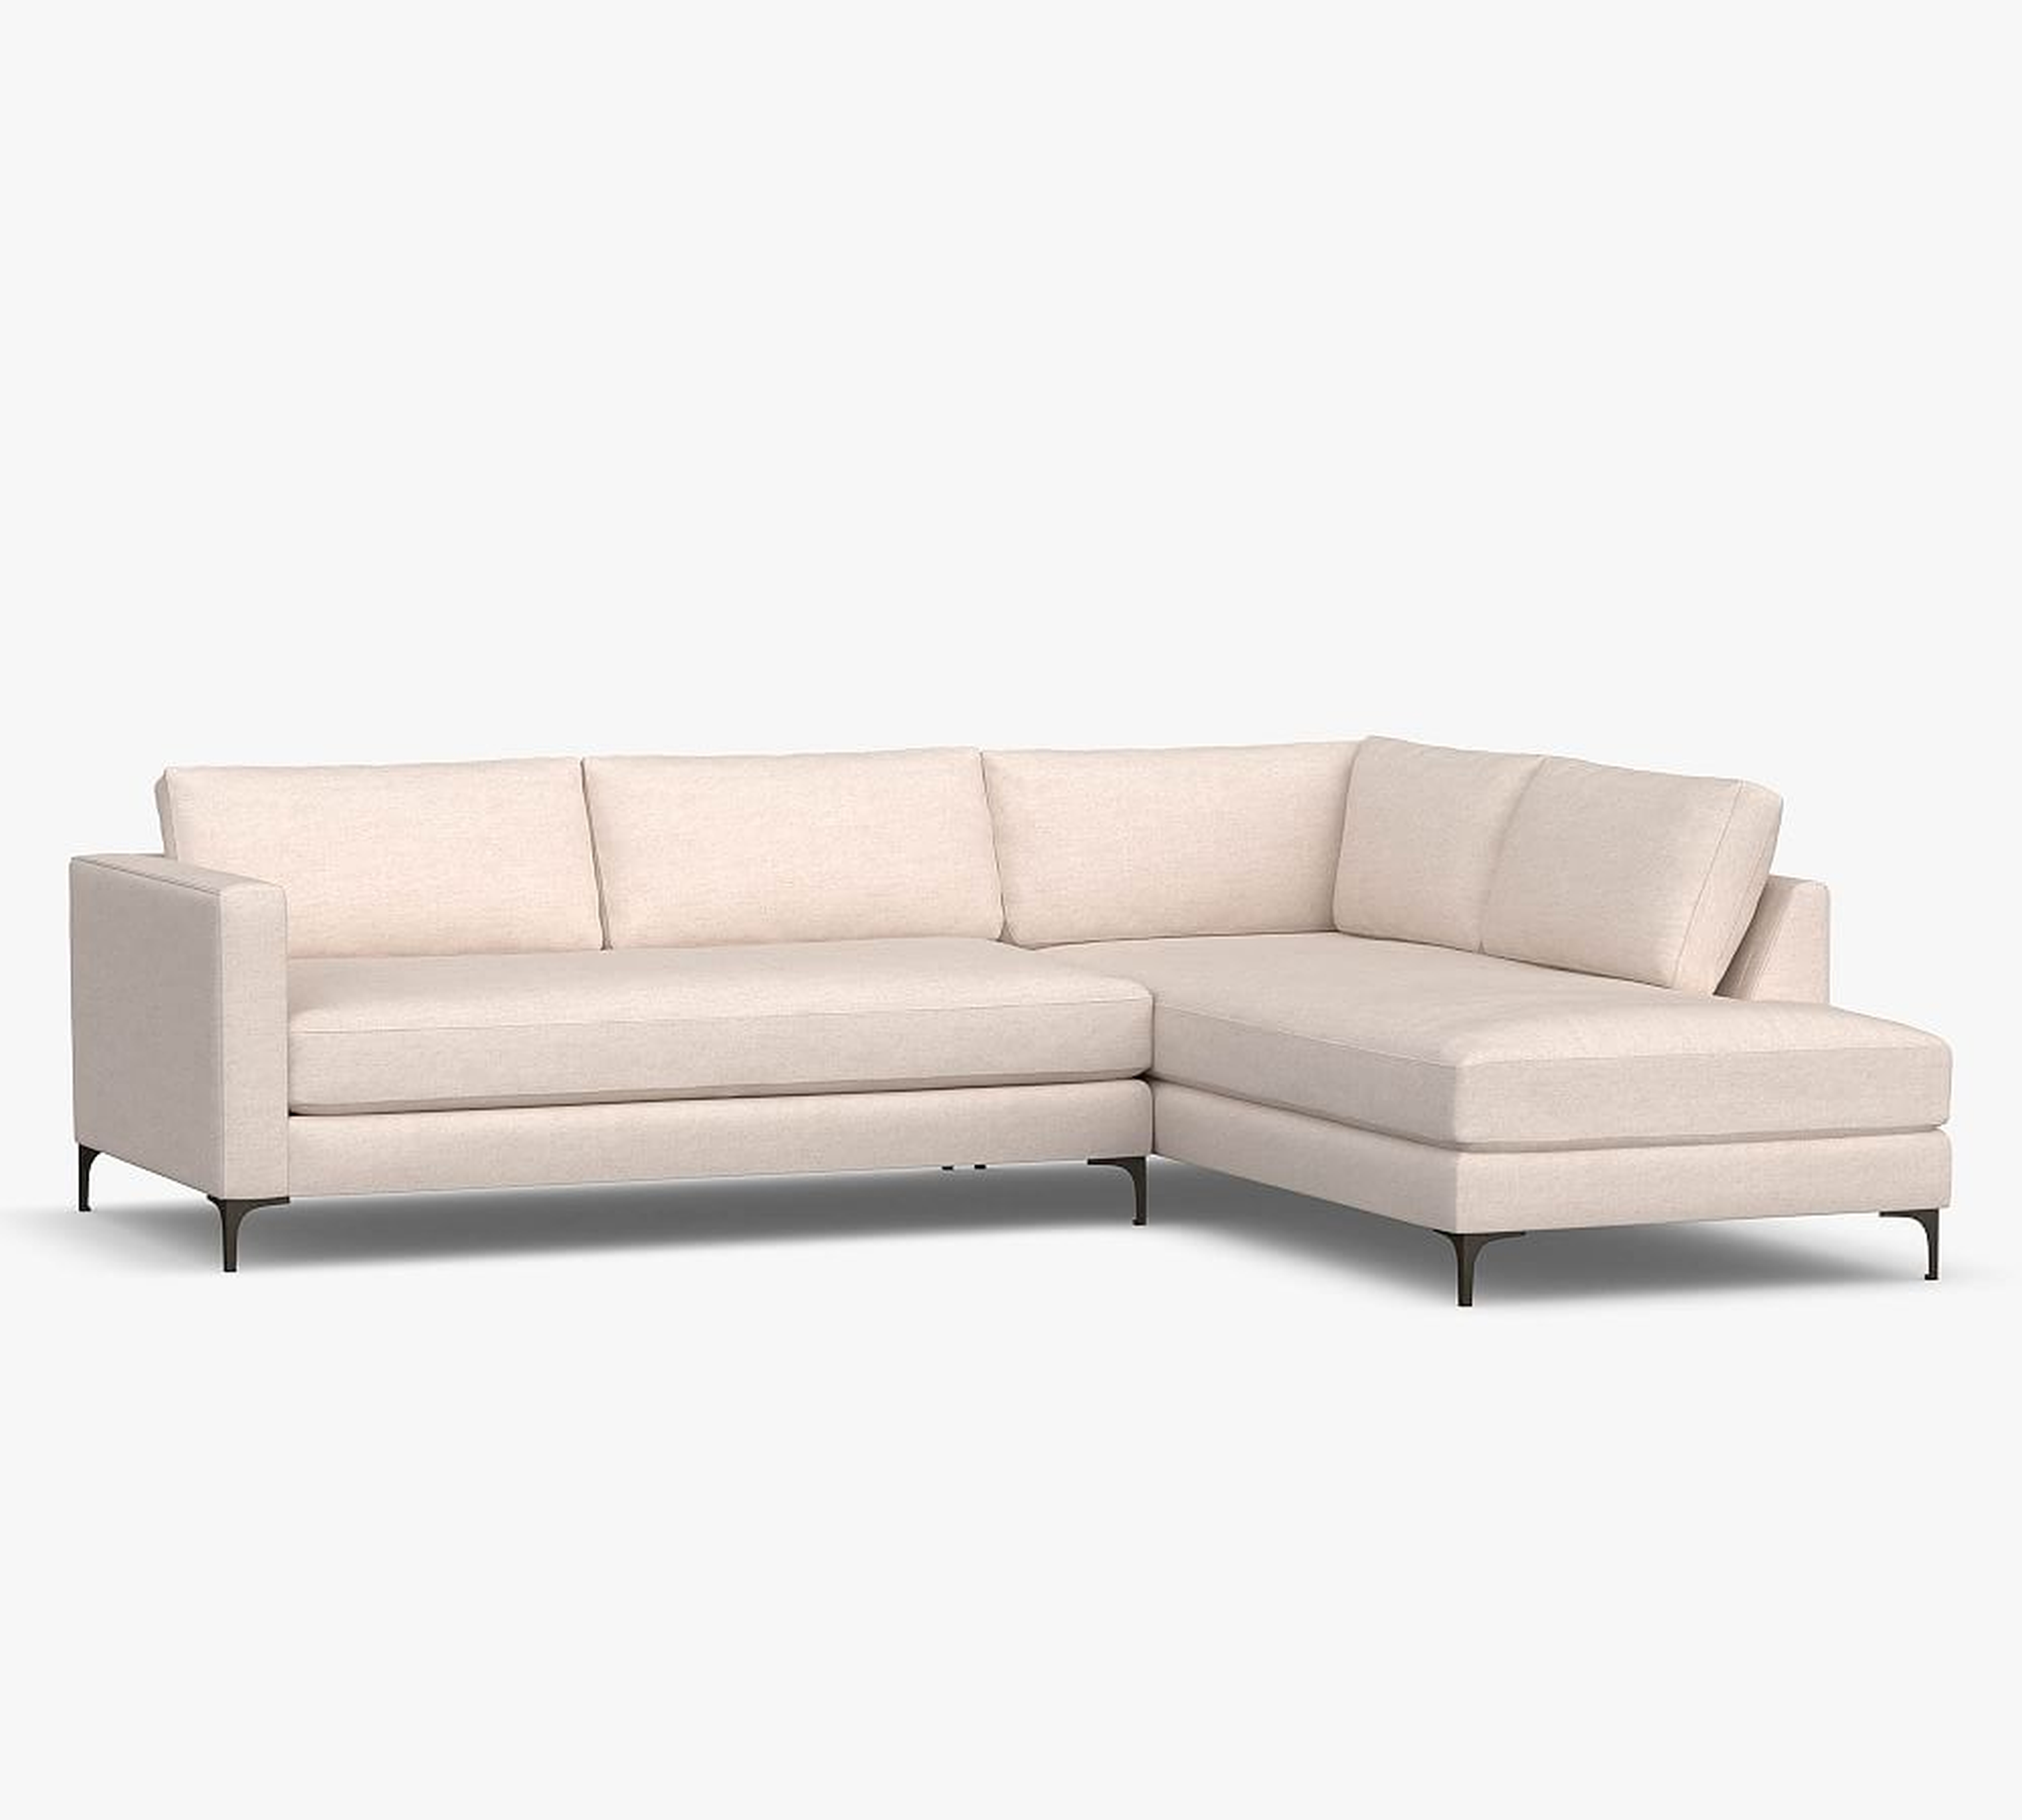 Jake Upholstered Left Sofa Return Bumper Sectional 2X1, Bench Cushion, Bronze Legs, Polyester Wrapped Cushions, Performance Boucle Oatmeal - Pottery Barn